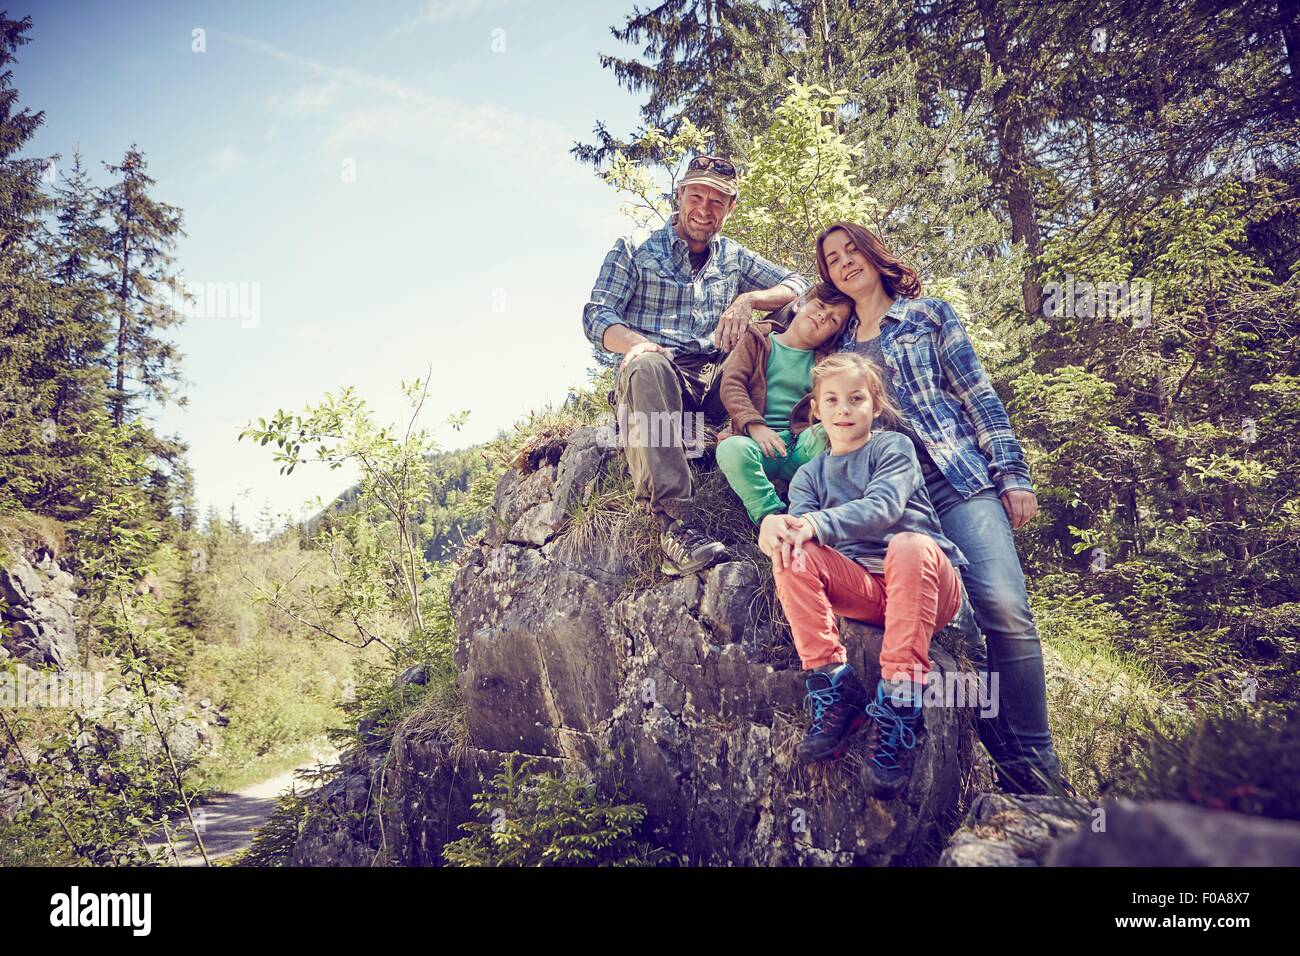 Portrait of family sitting on rock in forest Stock Photo